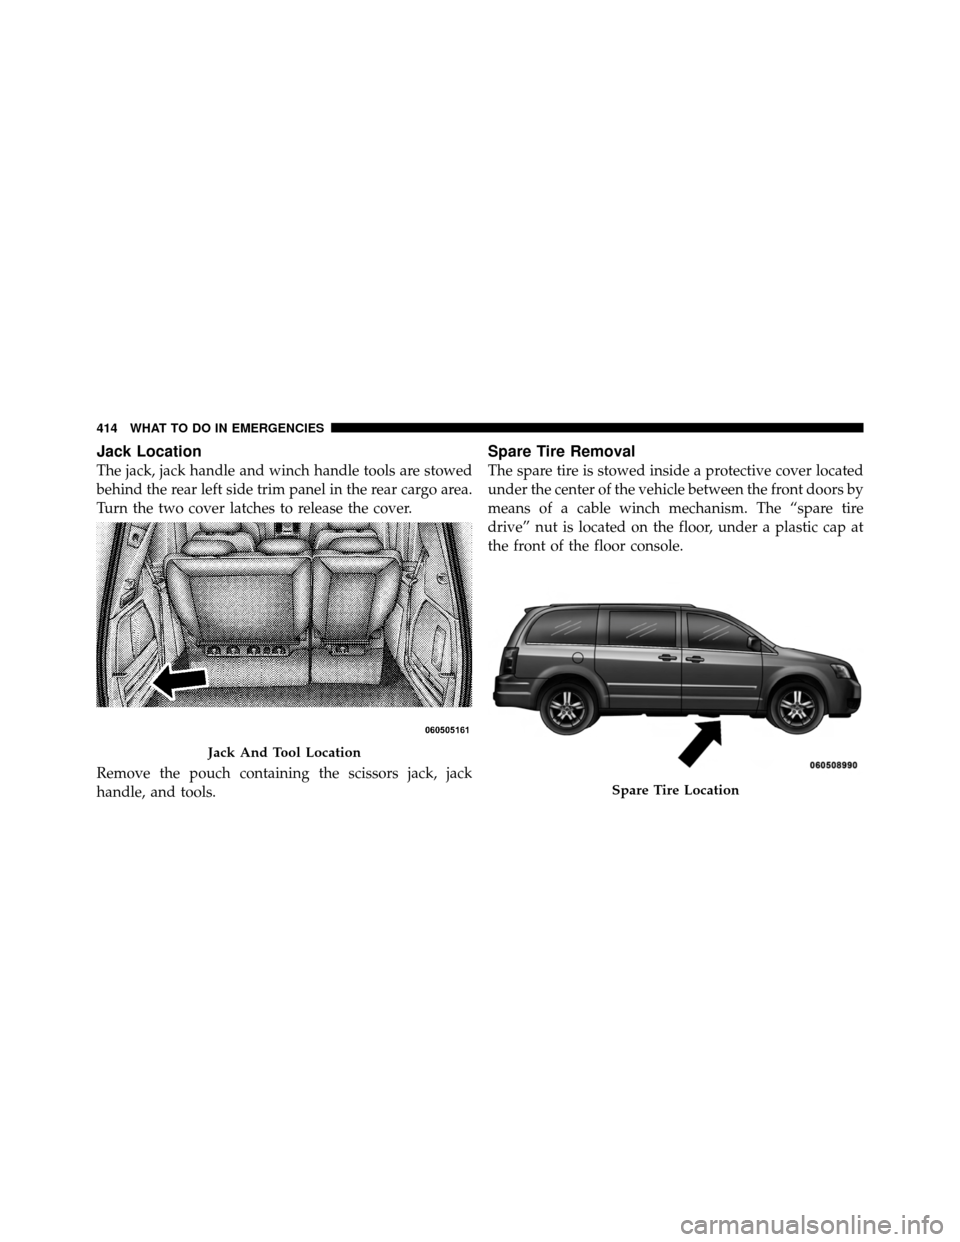 CHRYSLER TOWN AND COUNTRY 2010 5.G Owners Manual Jack Location
The jack, jack handle and winch handle tools are stowed
behind the rear left side trim panel in the rear cargo area.
Turn the two cover latches to release the cover.
Remove the pouch con